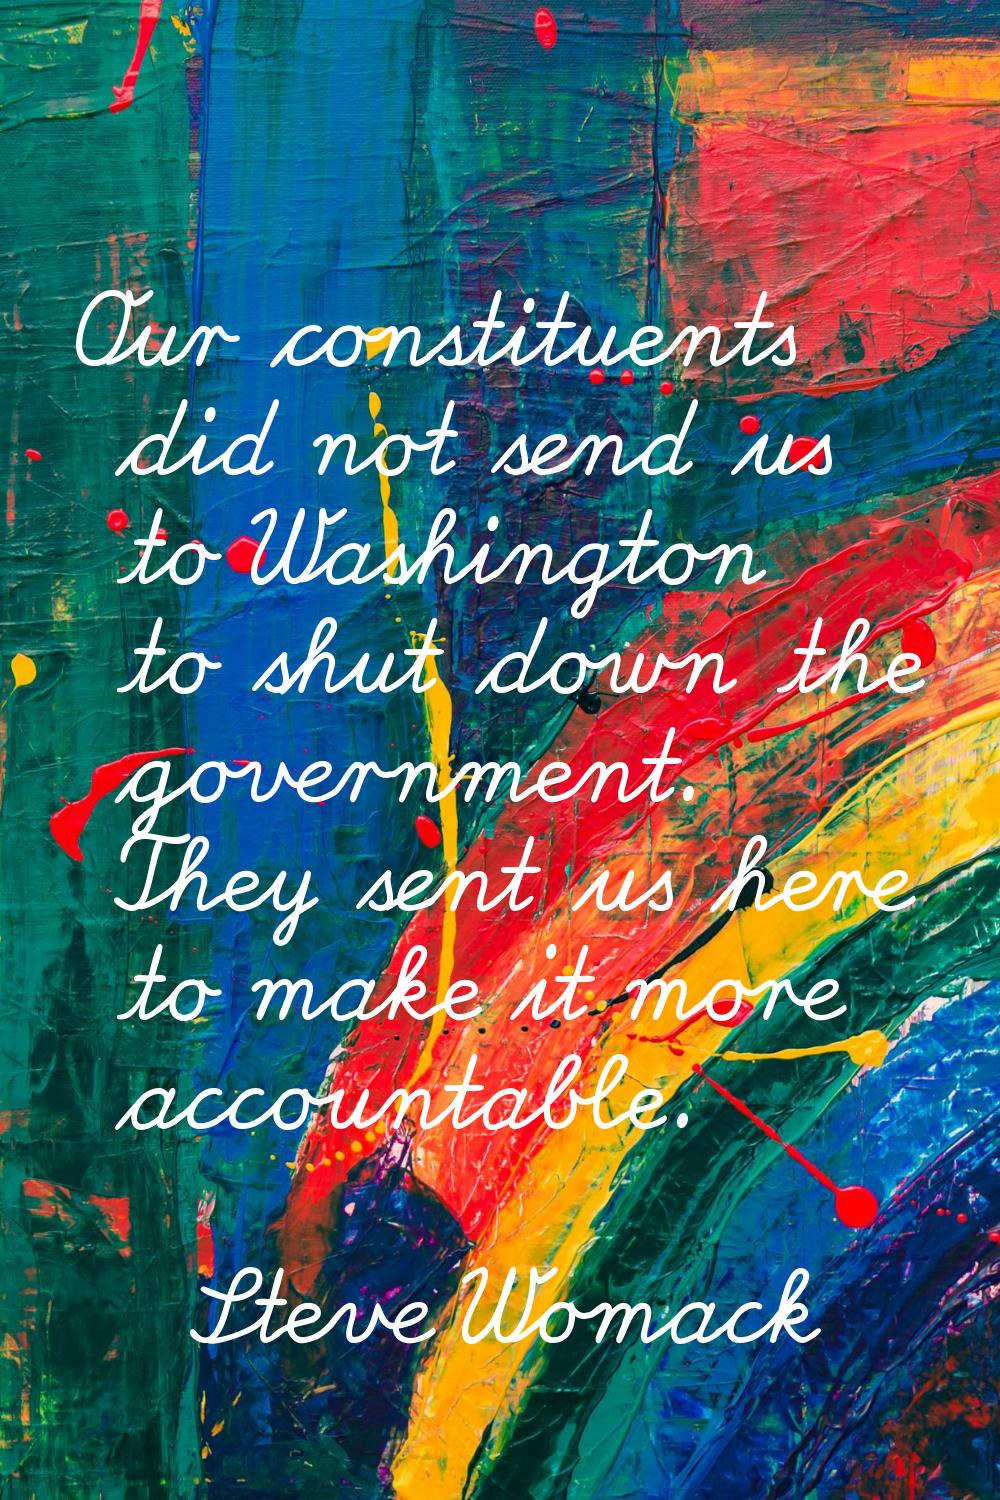 Our constituents did not send us to Washington to shut down the government. They sent us here to ma